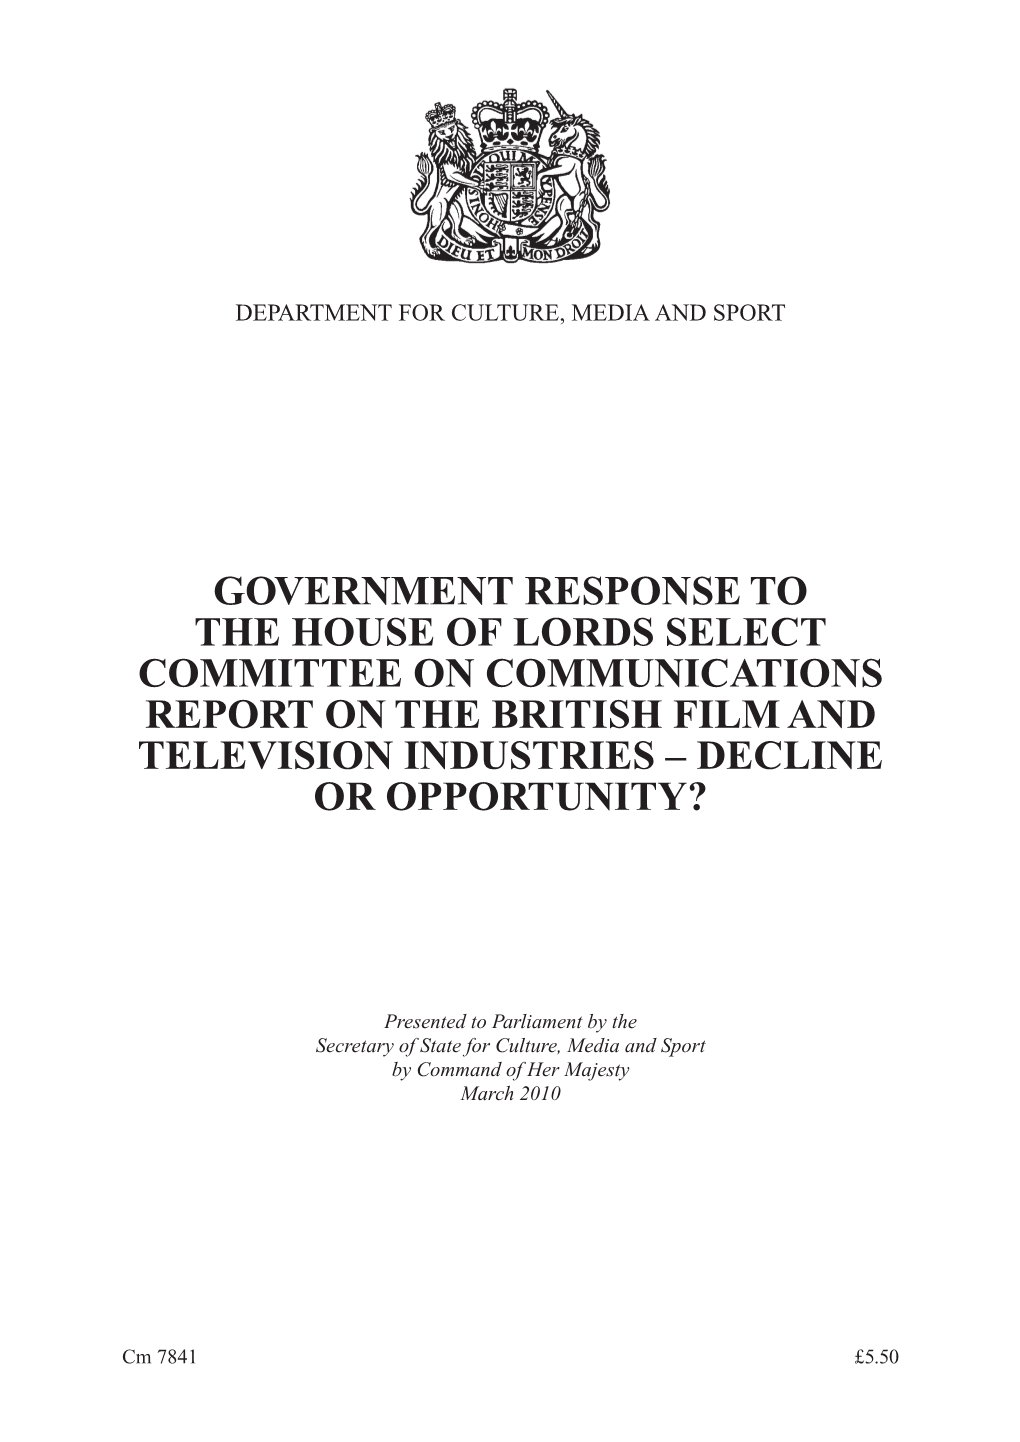 Government Response to the House of Lords Select Committee on Communications Report on the British Film and Television Industries – Decline Or Opportunity?